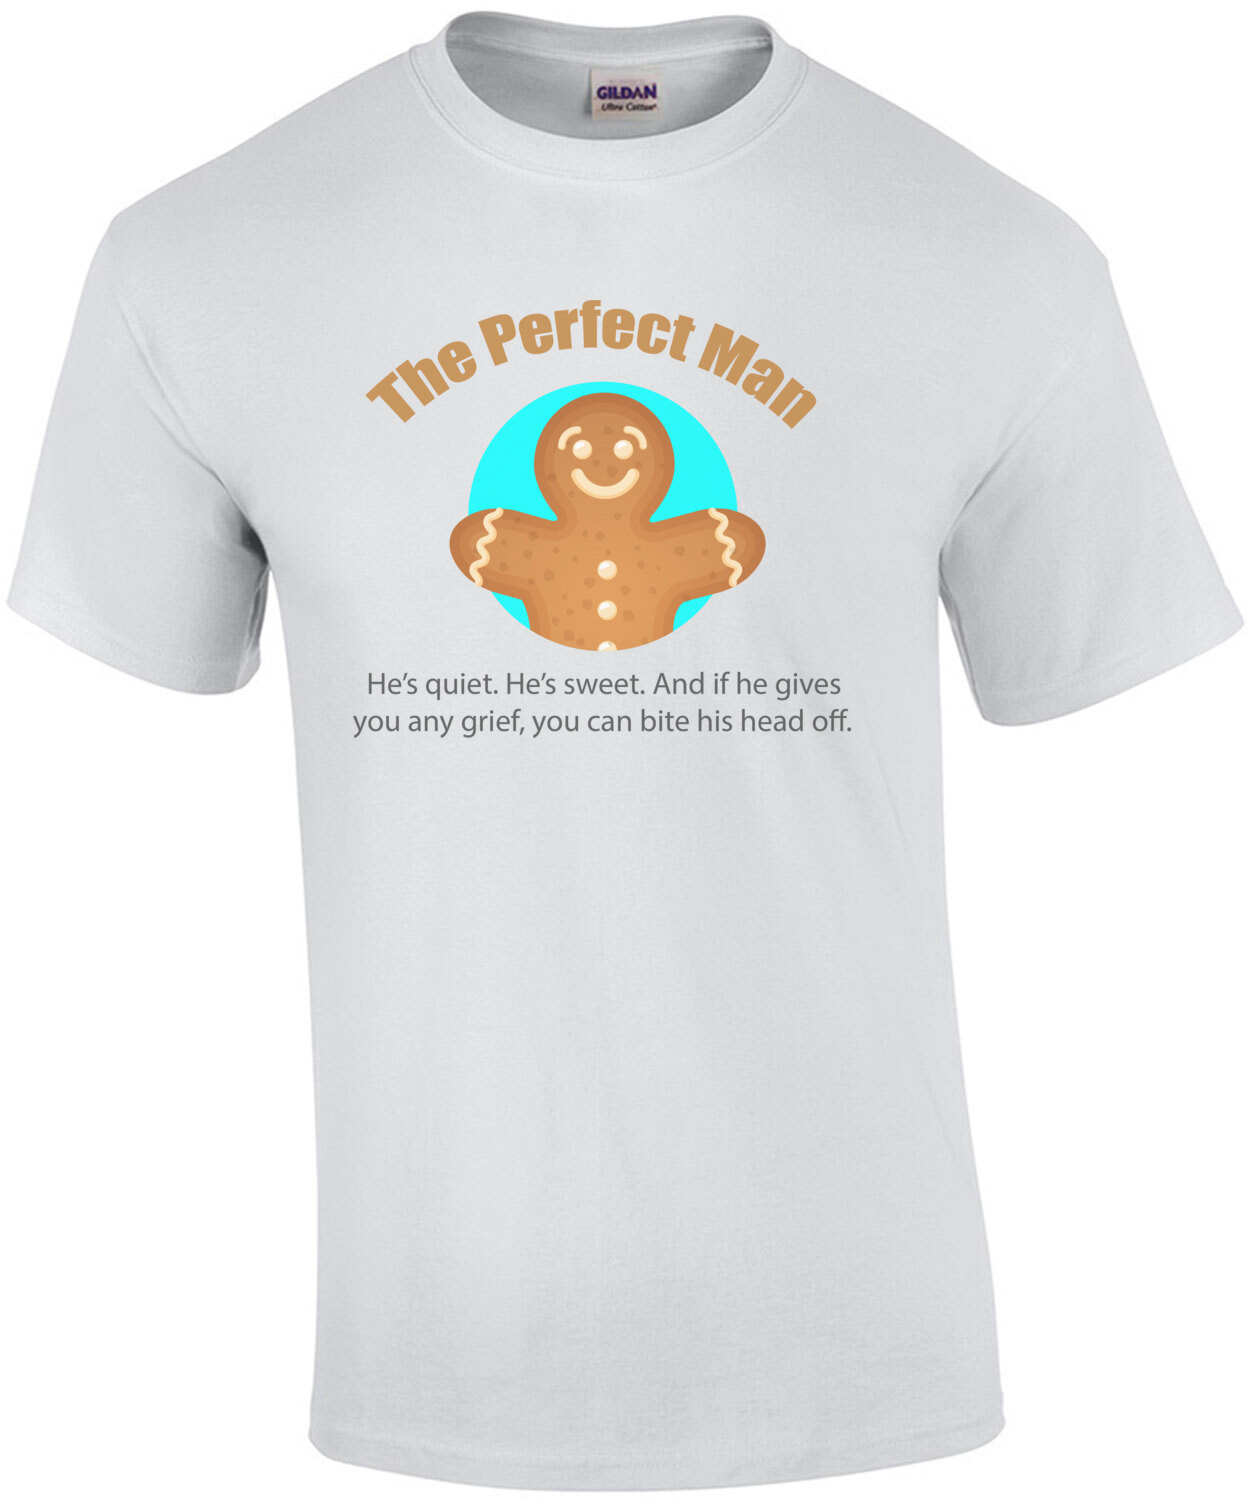 The Perfect Man - He's quiet. He's sweet. And if he gives you any grief, you can bite his head off. Funny Christmas T-Shirt